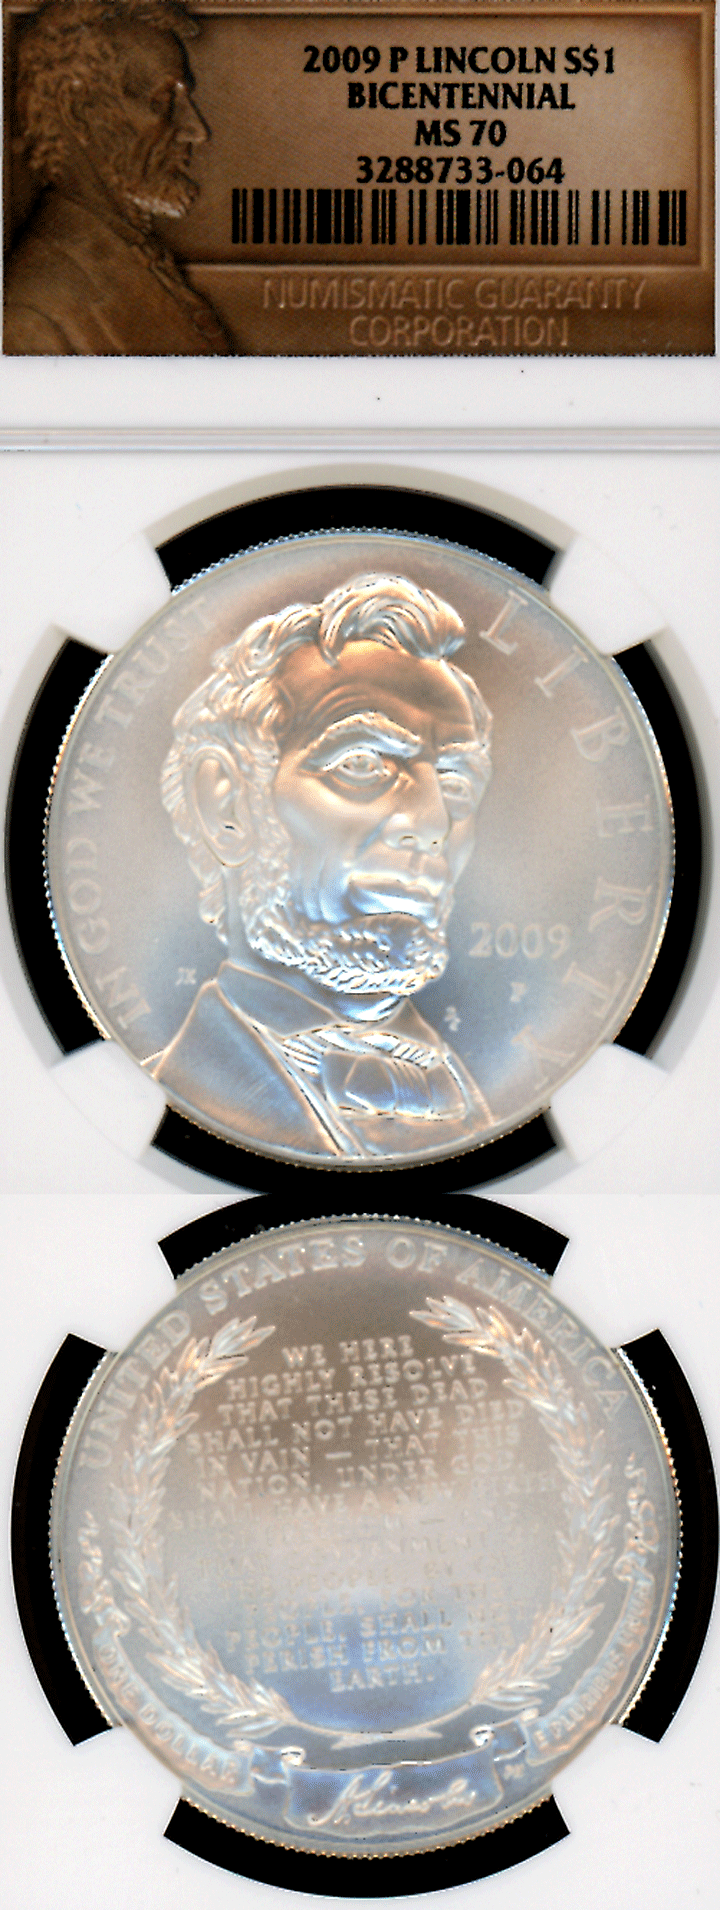 2009-P Lincoln $1 NGC MS 70 US silver commem